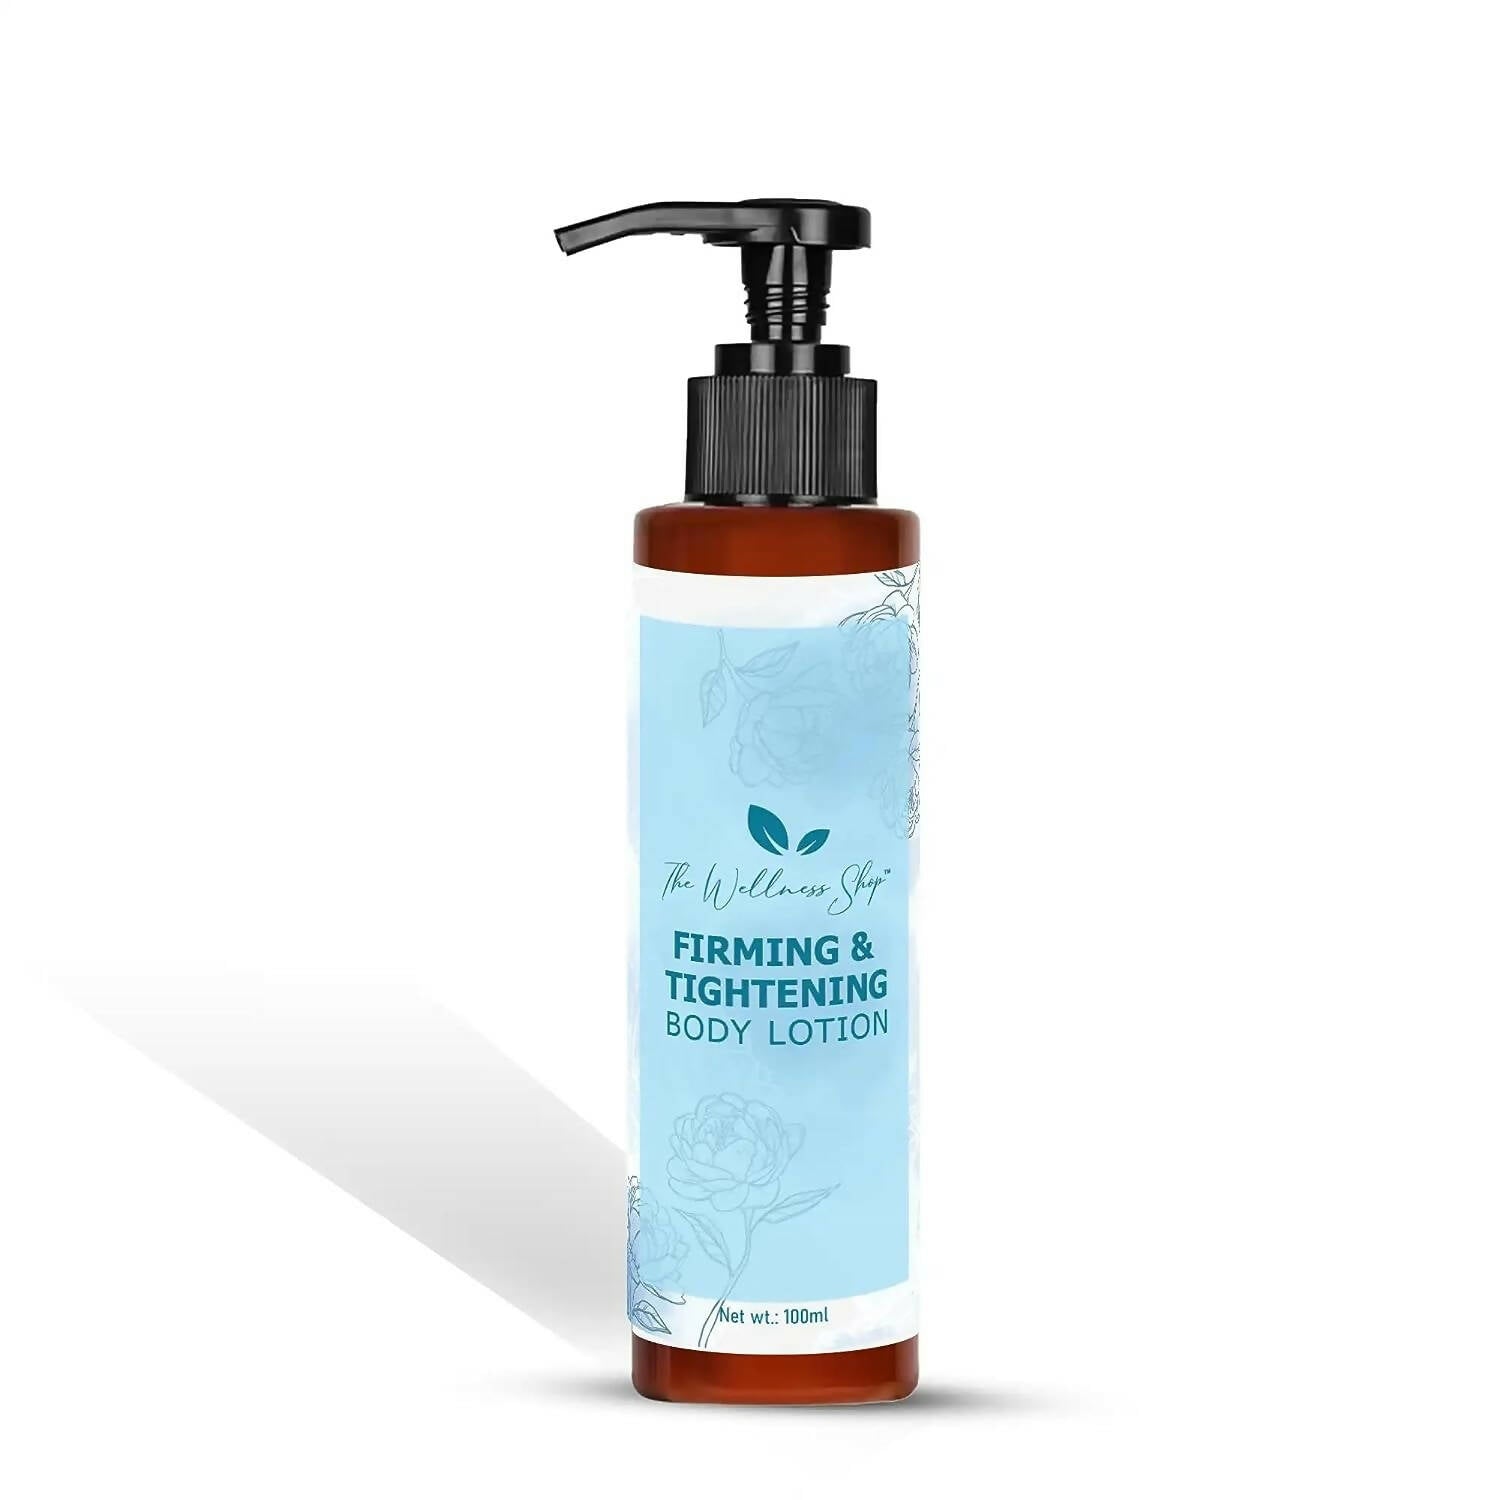 The Wellness Shop Firming & Tightening Body Lotion - buy in USA, Australia, Canada